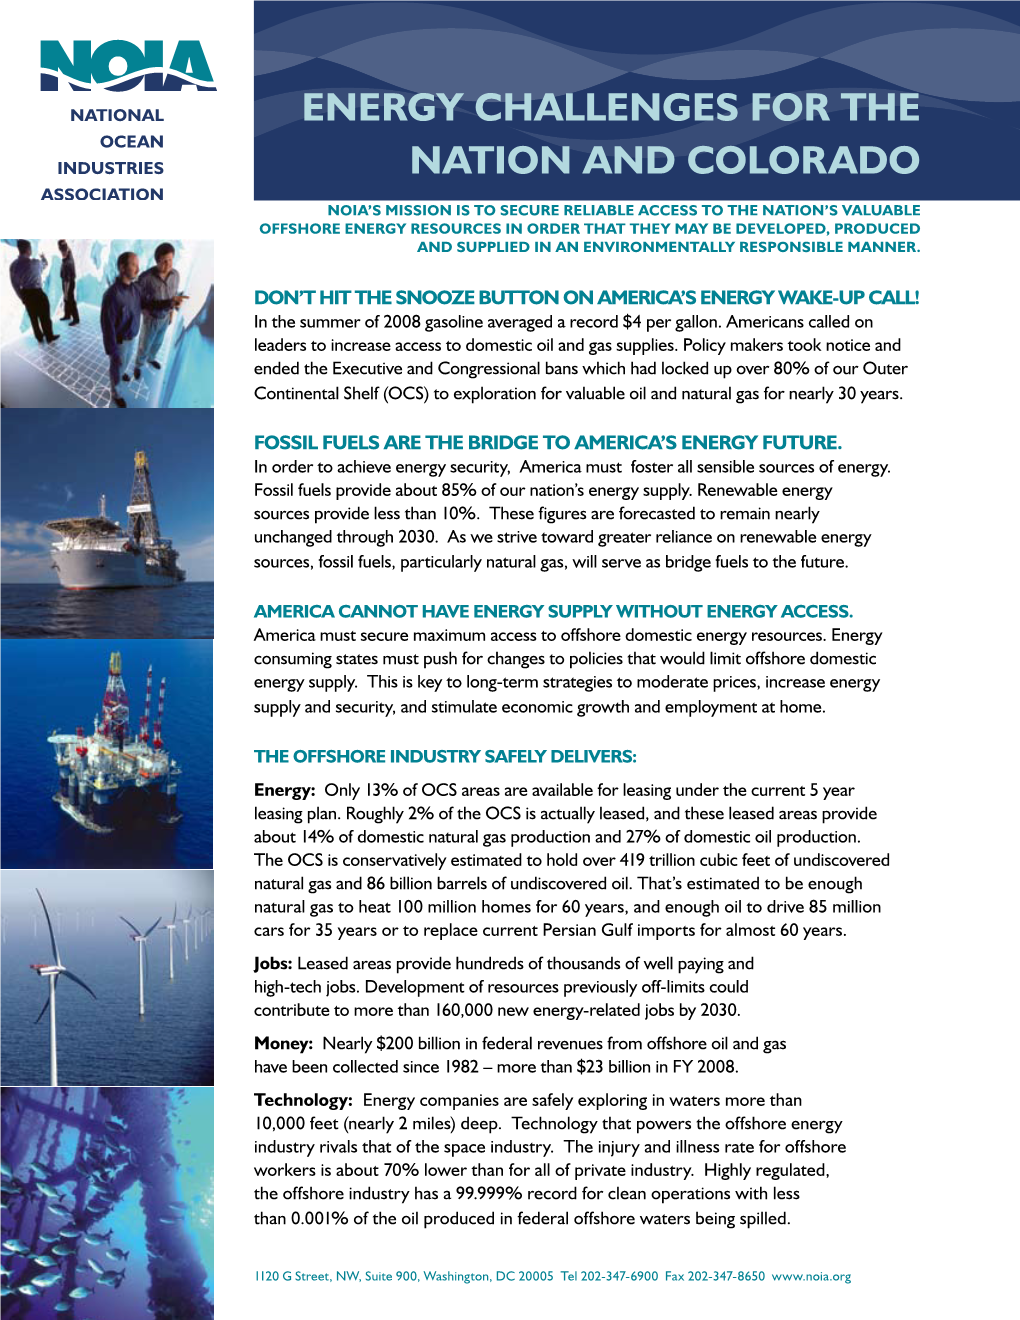 Energy Challenges for the Nation and Colorado